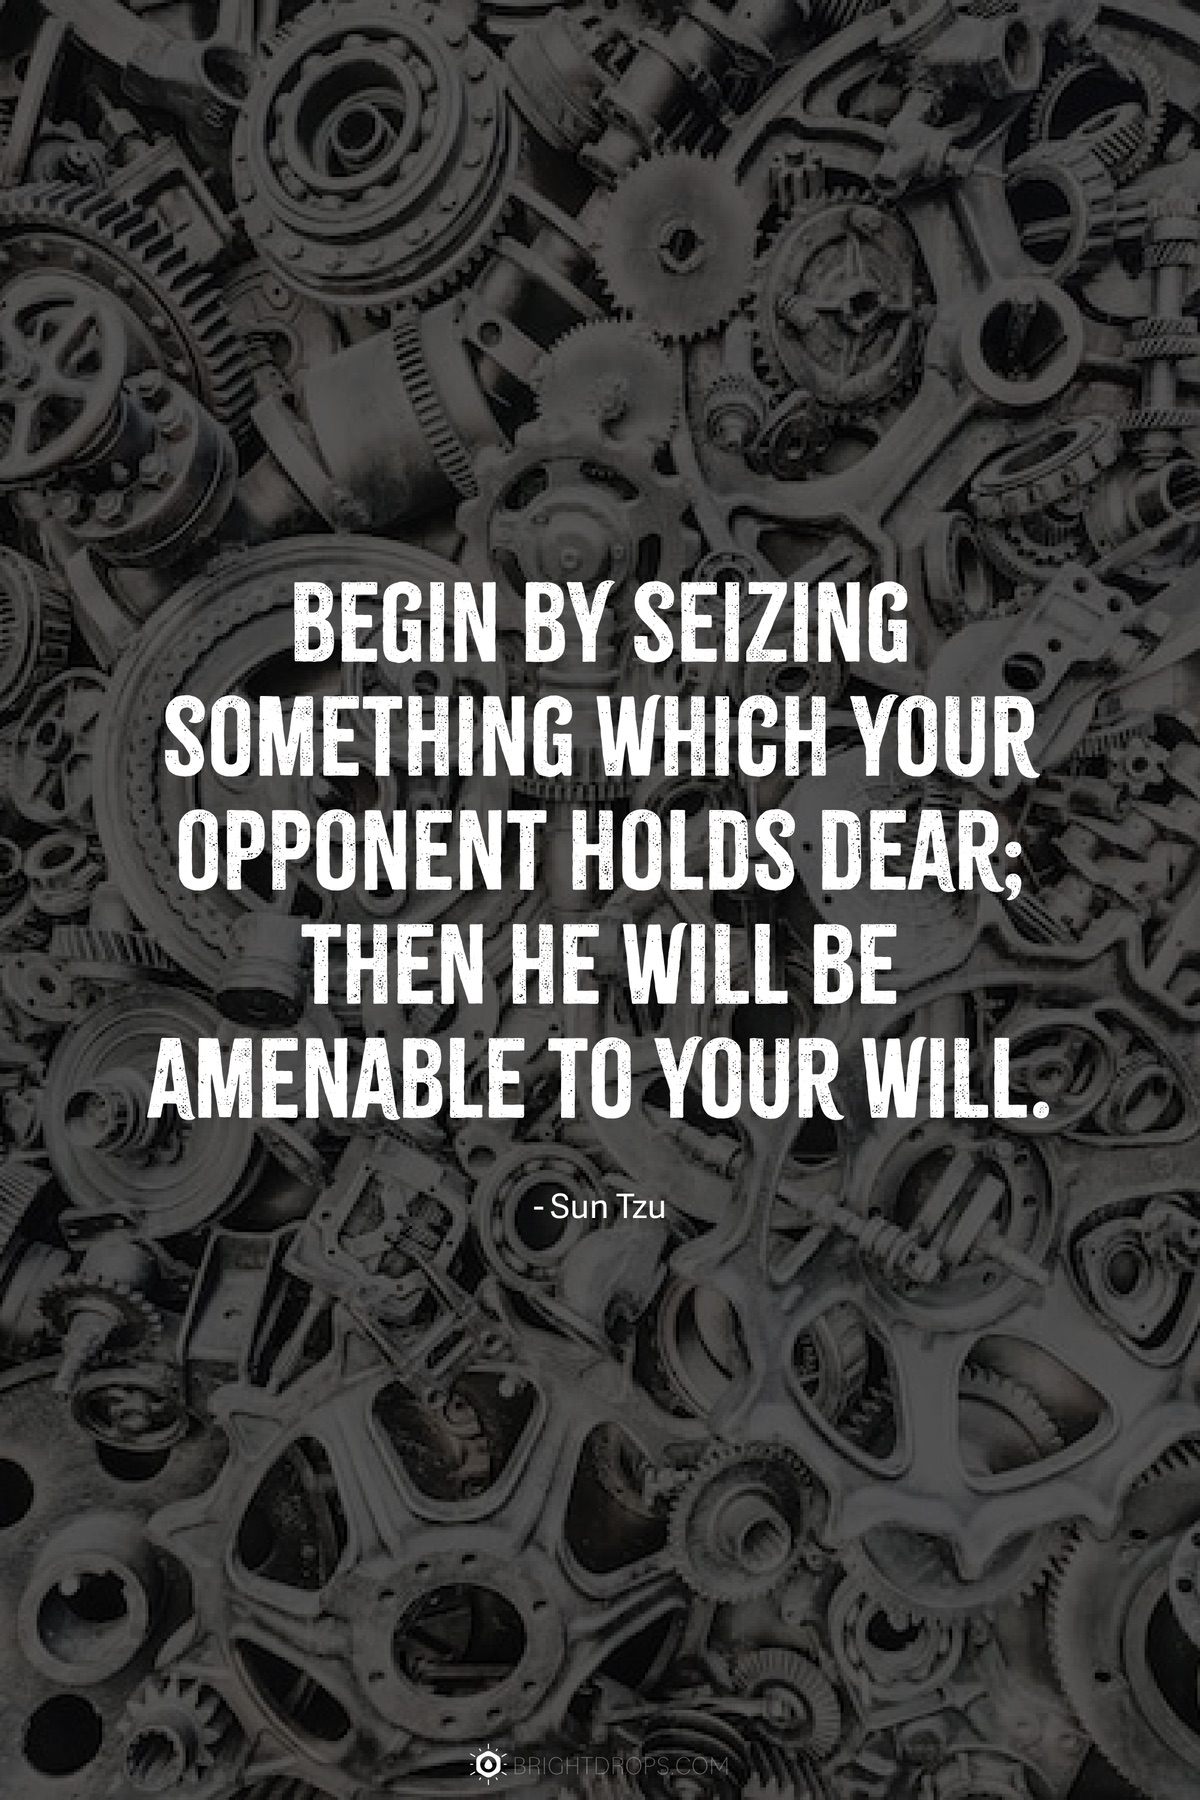 Begin by seizing something which your opponent holds dear; then he will be amenable to your will.